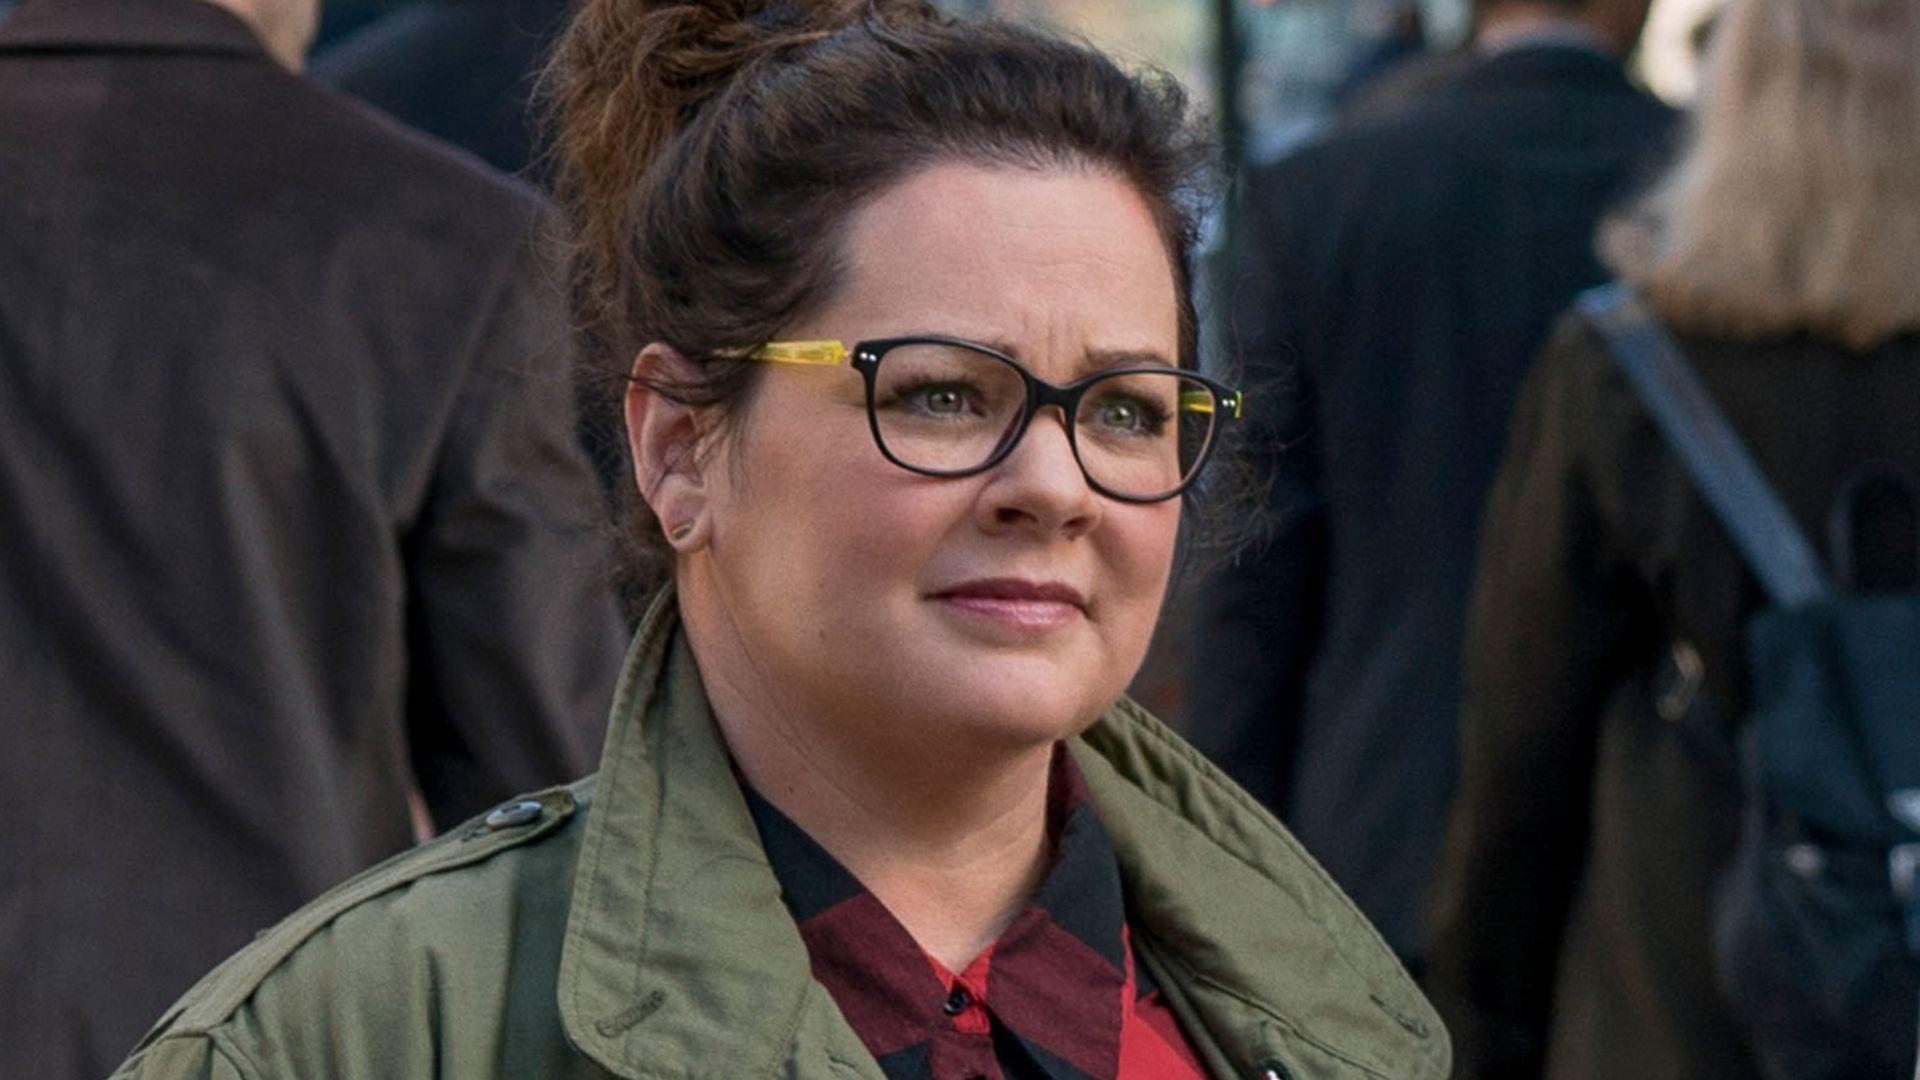 Melissa McCarthy fires back at 'Ghostbusters' haters with perfect